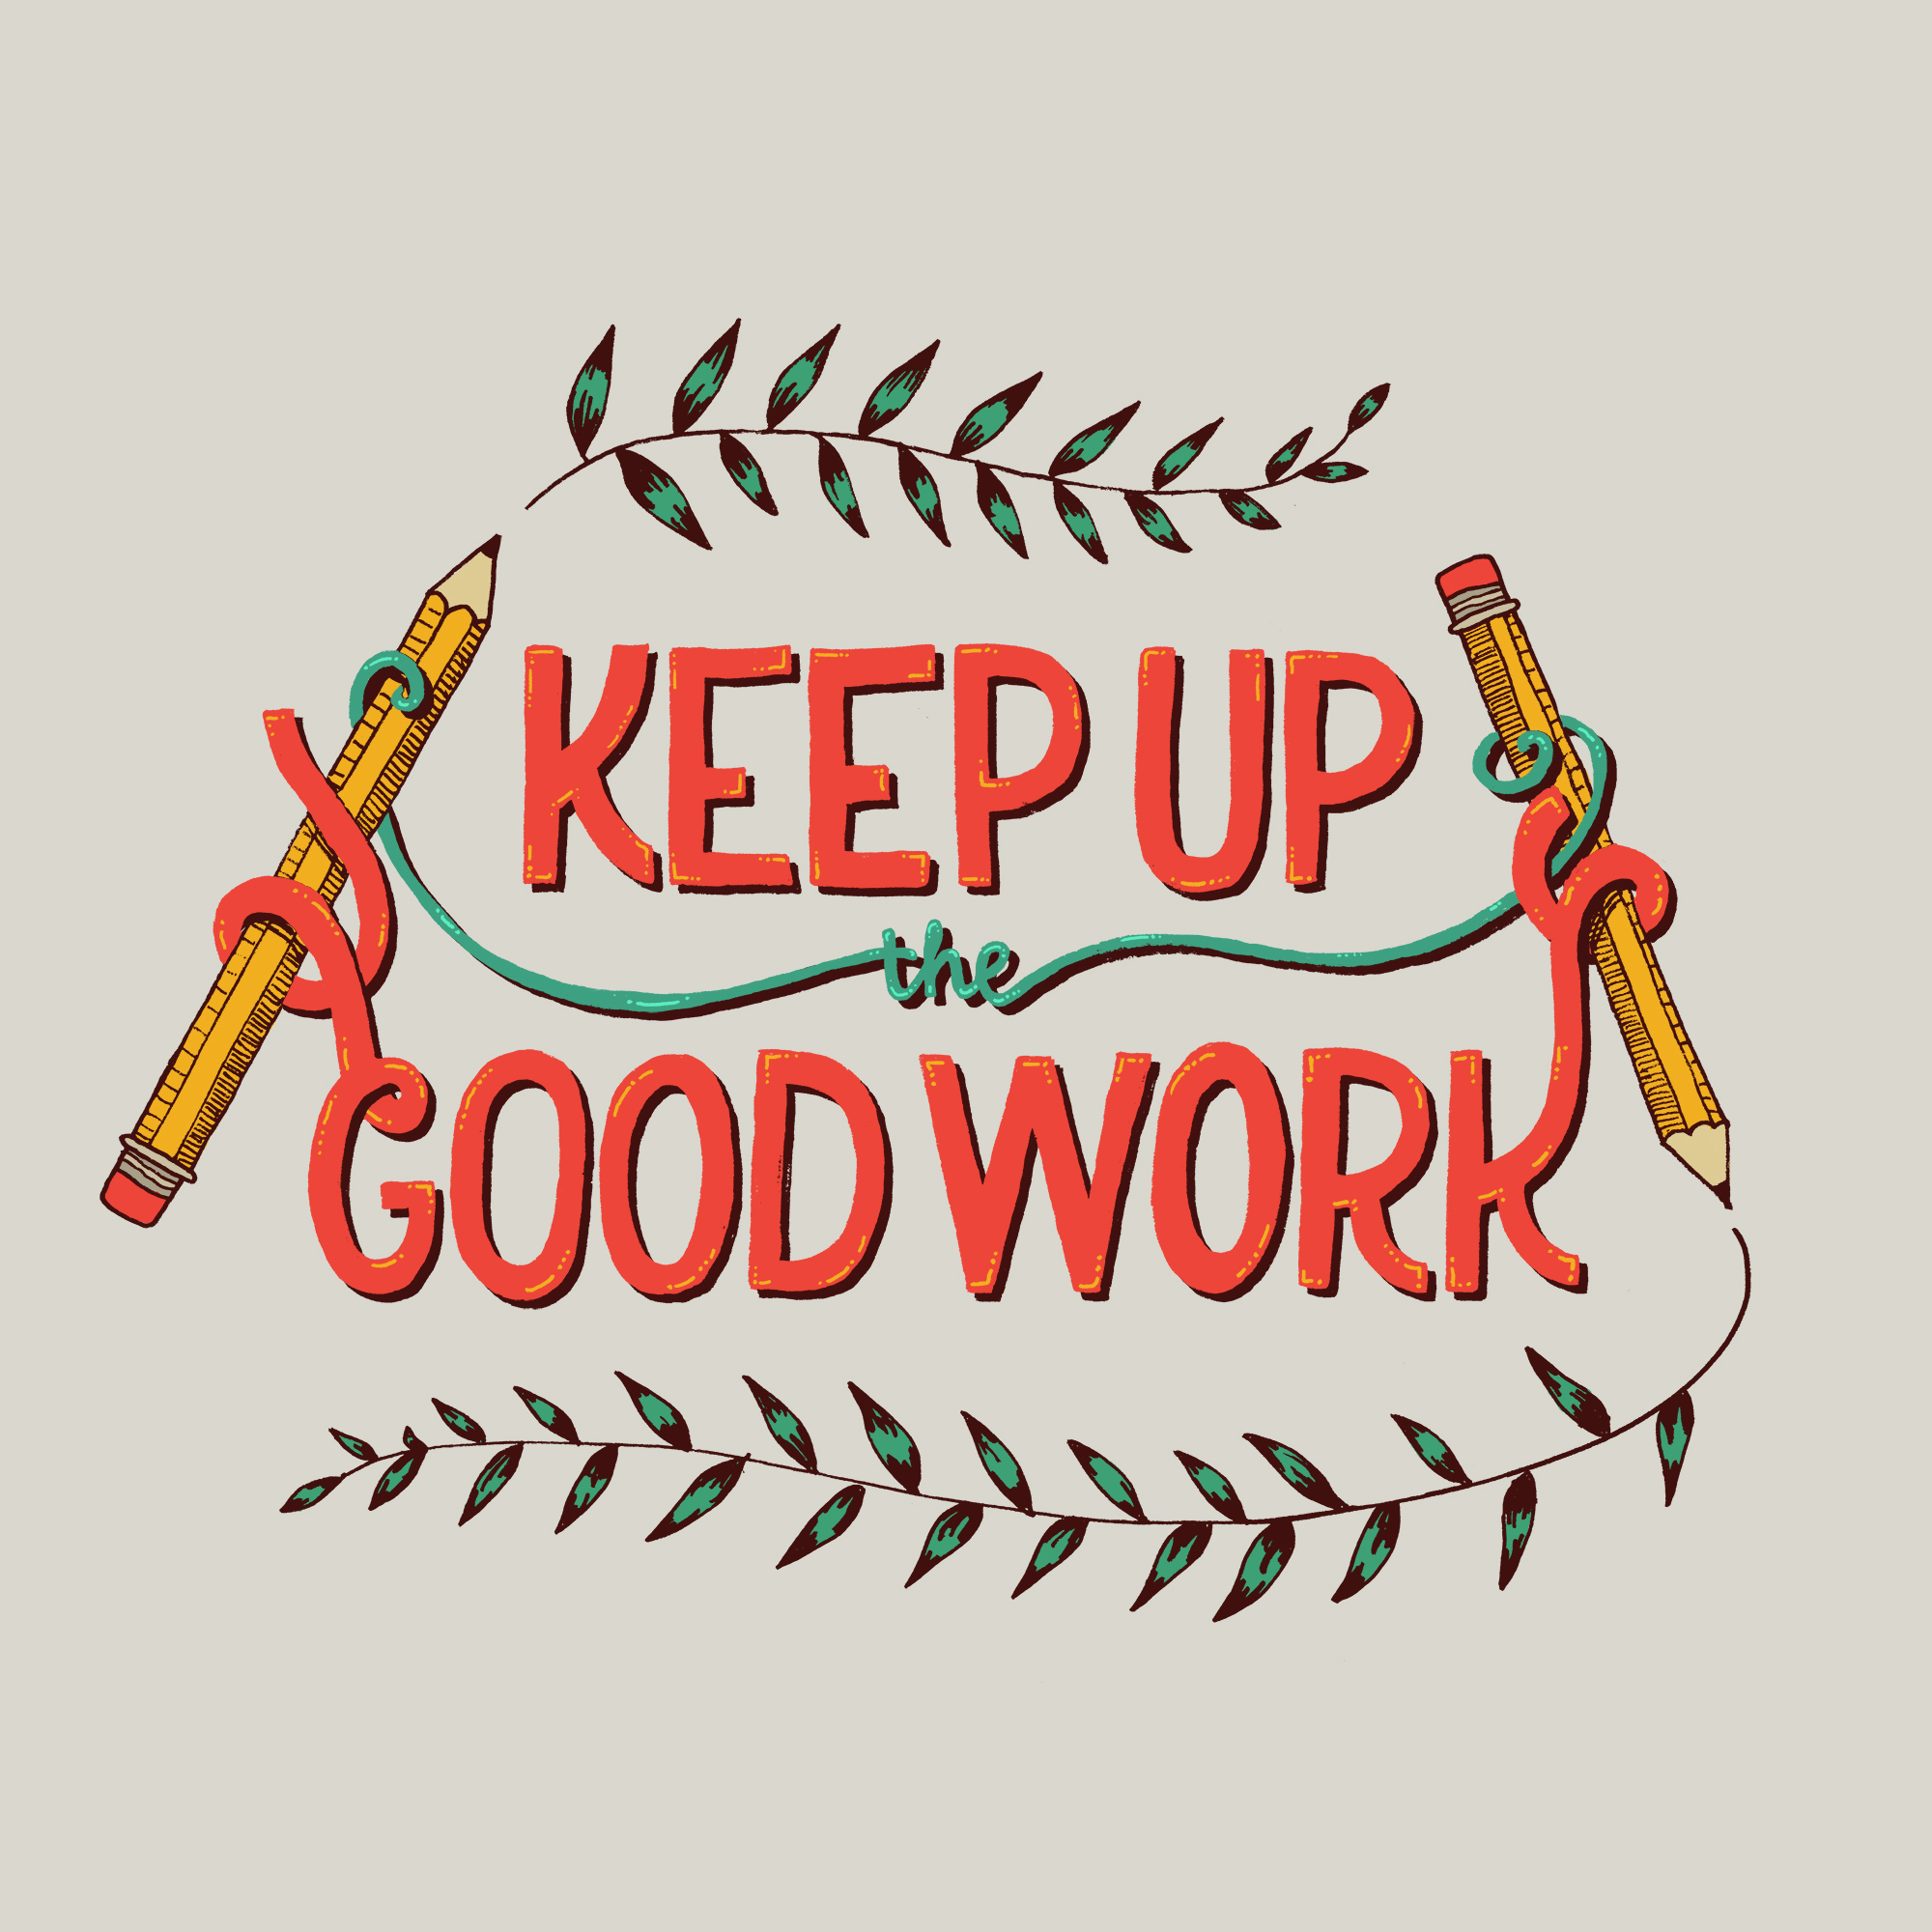 Keep up the good work picture.